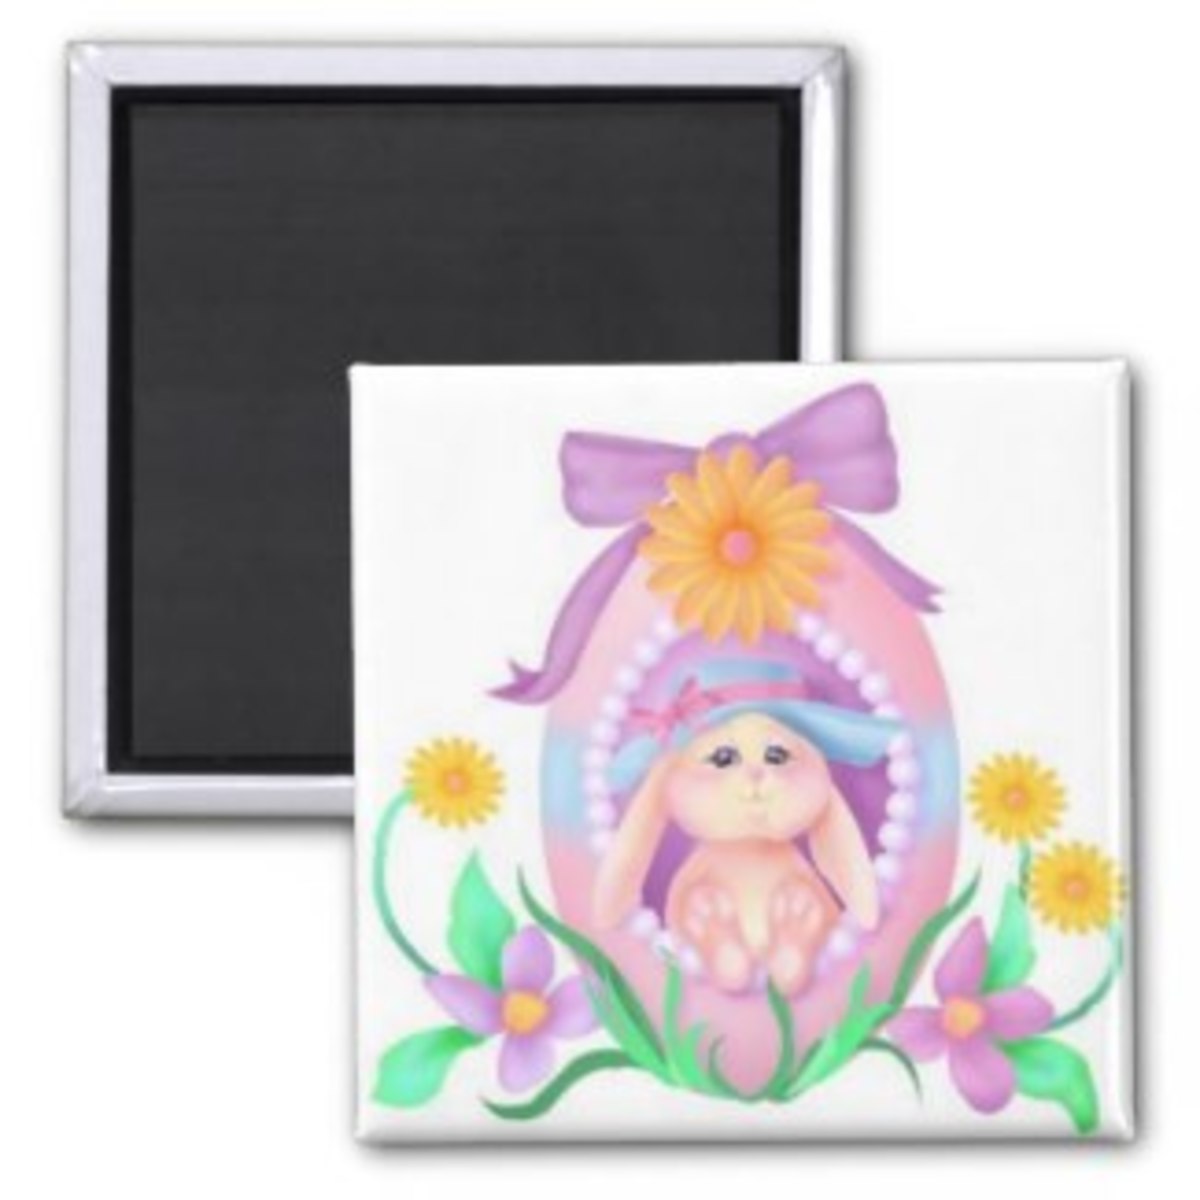 This beautiful magnet is available at zazzle and would be a nice party favor too